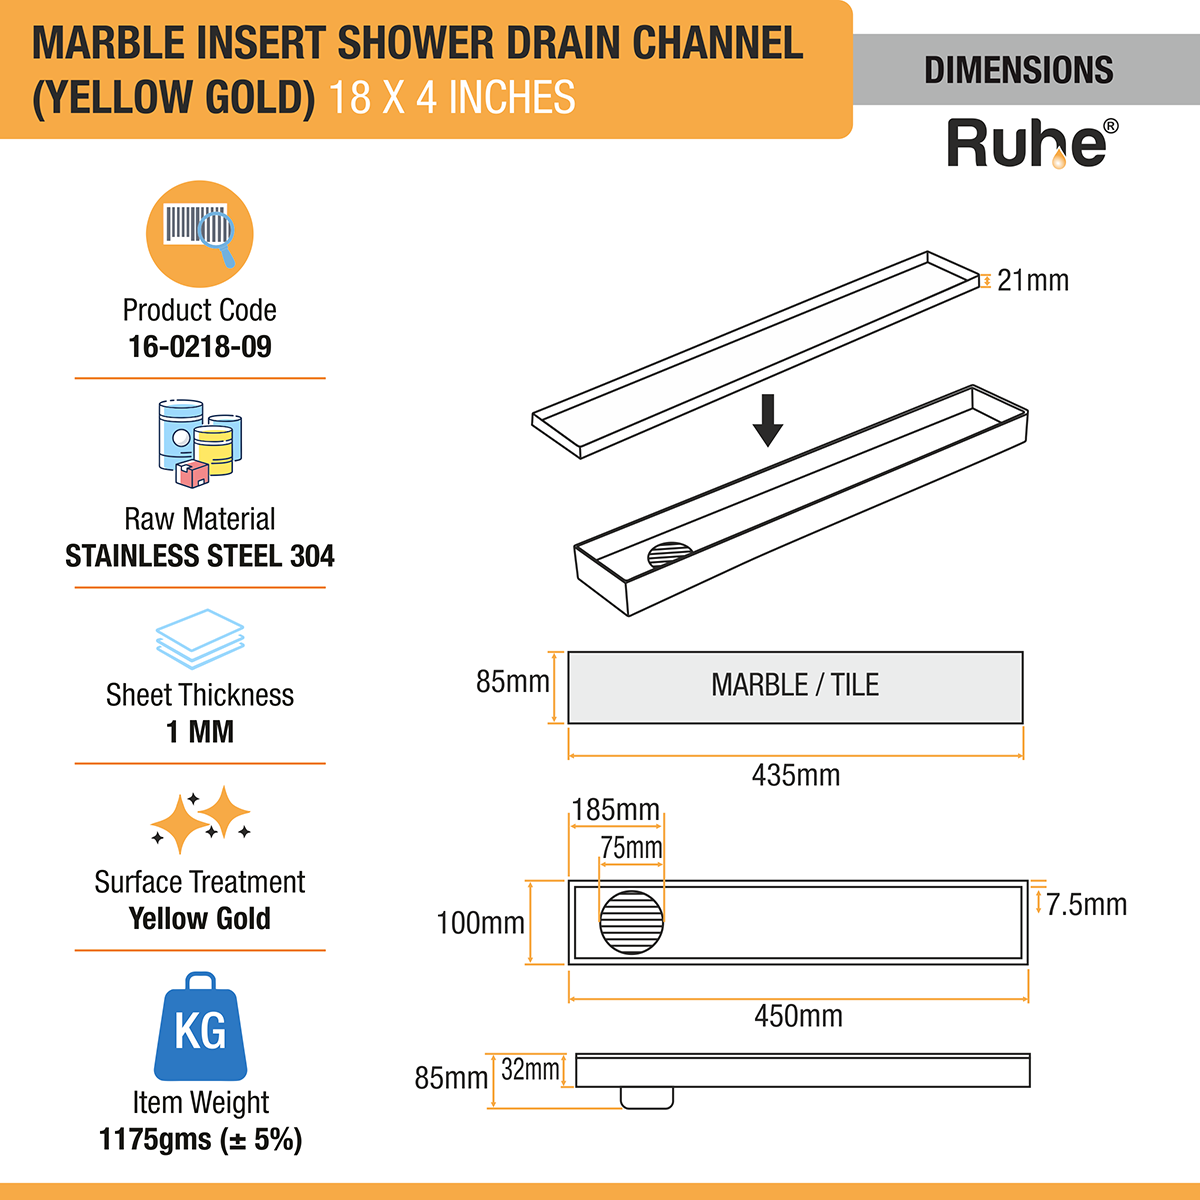 Marble Insert Shower Drain Channel (18 x 4 Inches) YELLOW GOLD PVD Coated dimensions and sizes